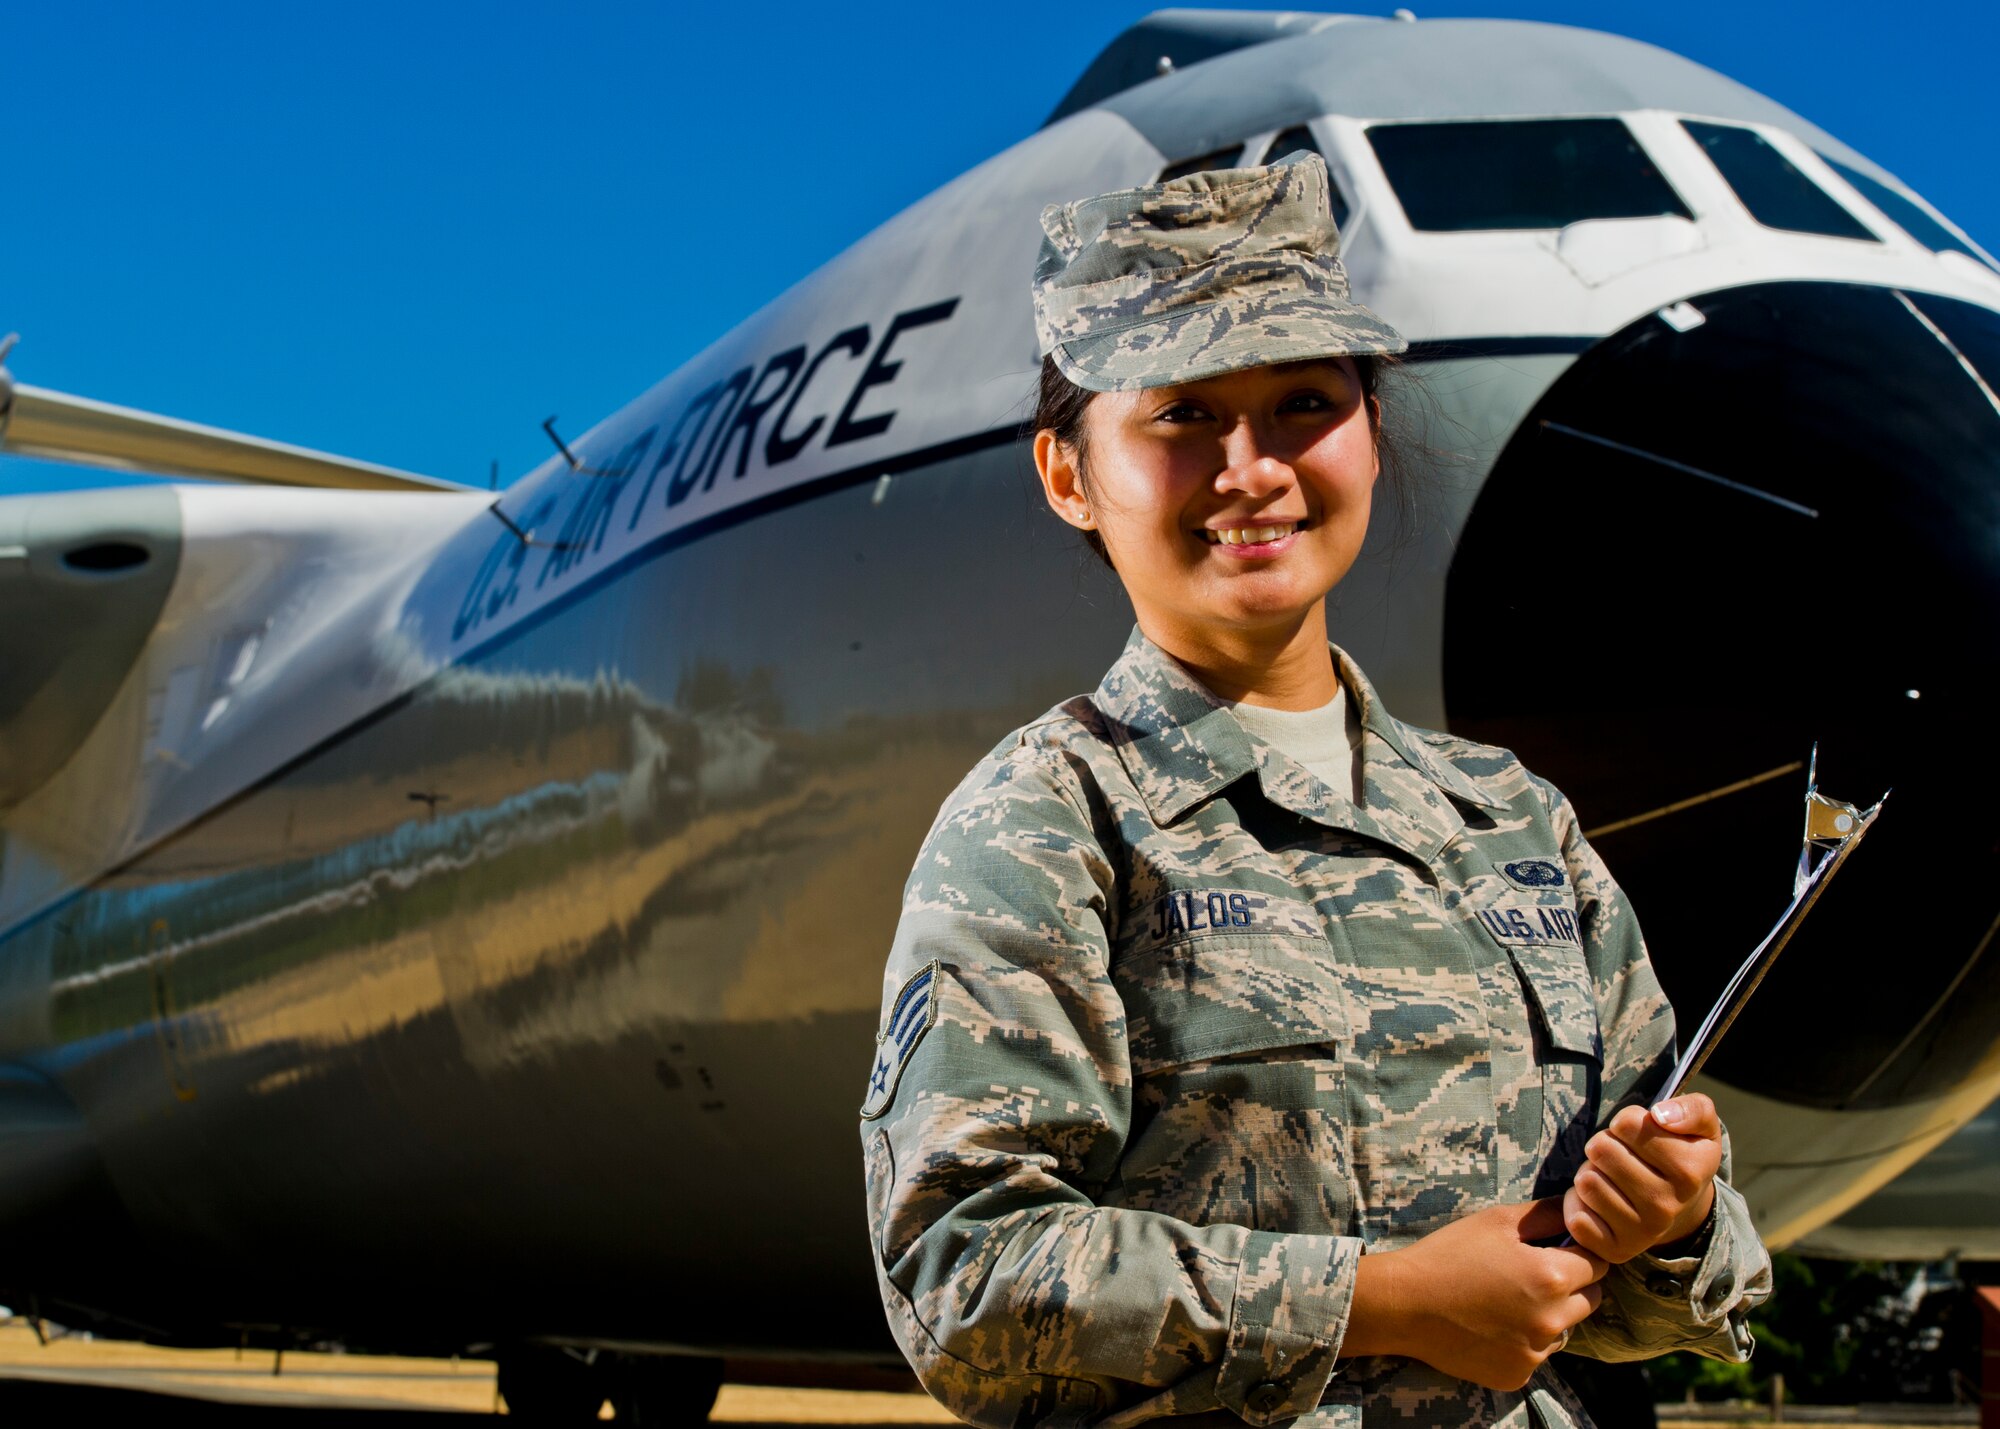 Air Force Reserve Senior Airman Anne Venice Jalos, a 446th Airlift Wing finance manager, stands in Heritage Park at McChord Field, Wash., Aug. 7, 2015. Jalos became a U.S. citizen after completing Air Force basic military training. (U.S. Air Force Reserve photo/Senior Airman Daniel Liddicoet)